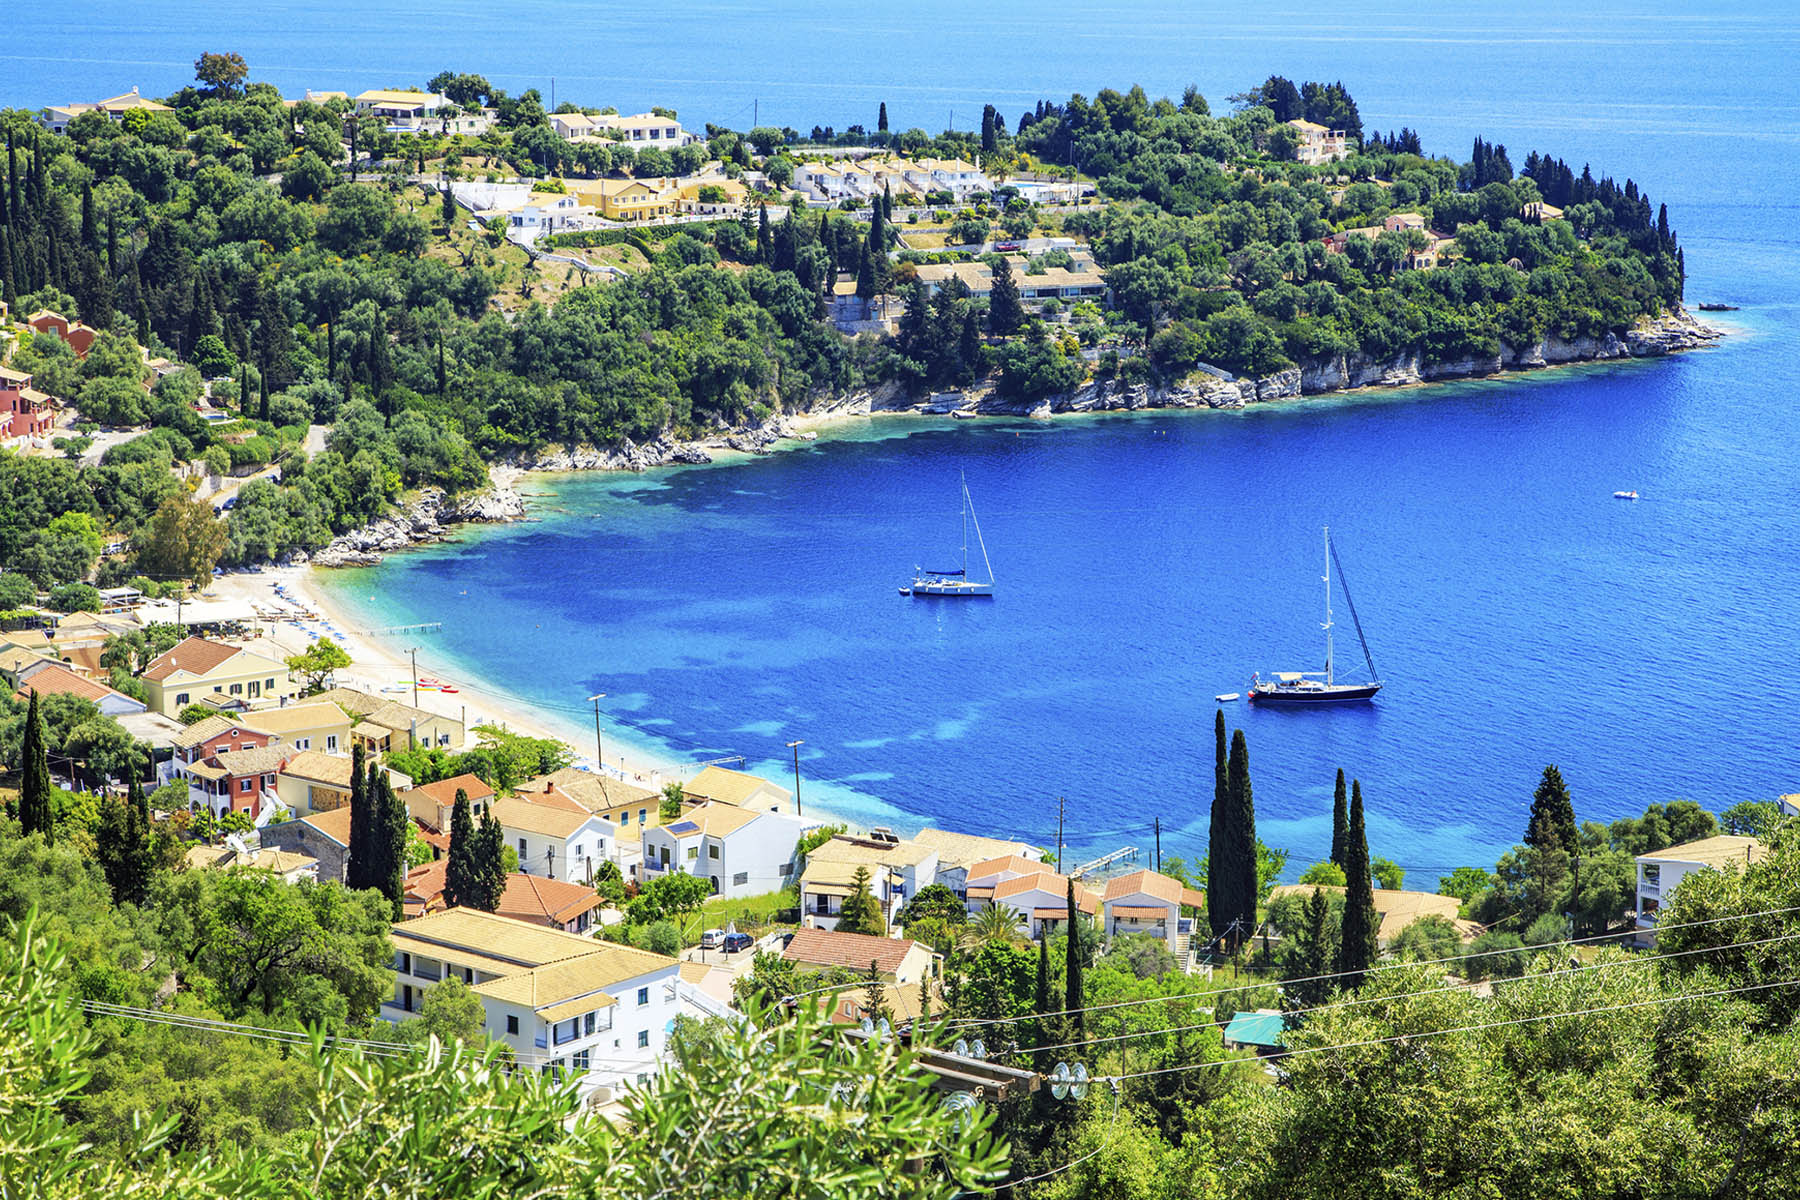 A photo of a beach on the Greek island of Corfu with stunning blue waters.